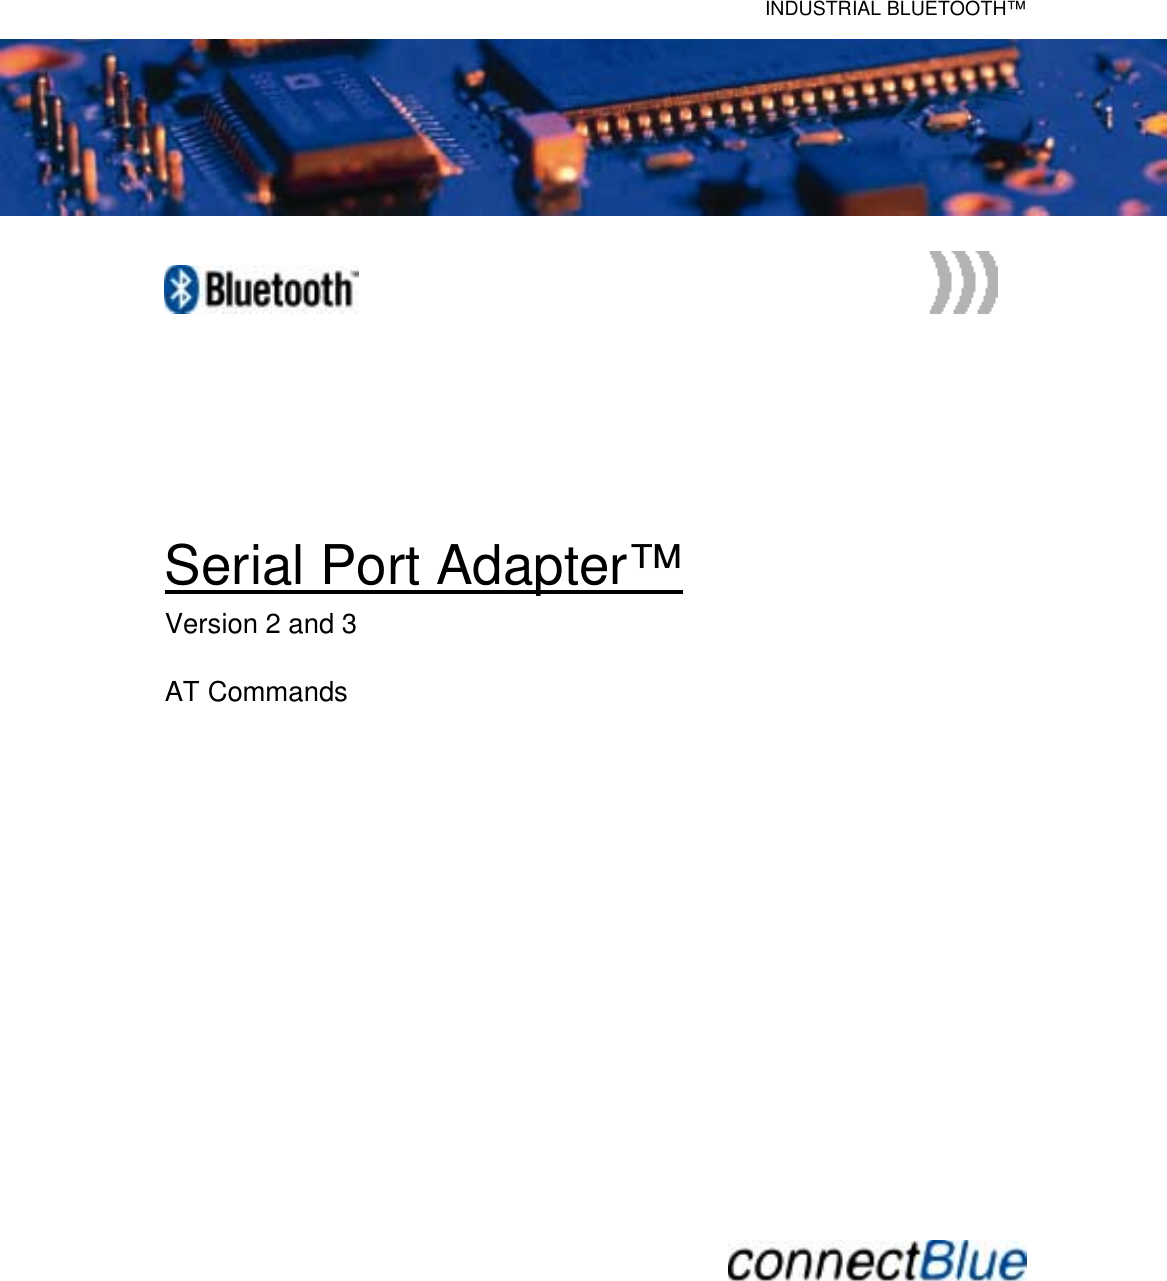   INDUSTRIAL BLUETOOTH™              Serial Port Adapter™ Version 2 and 3  AT Commands                     